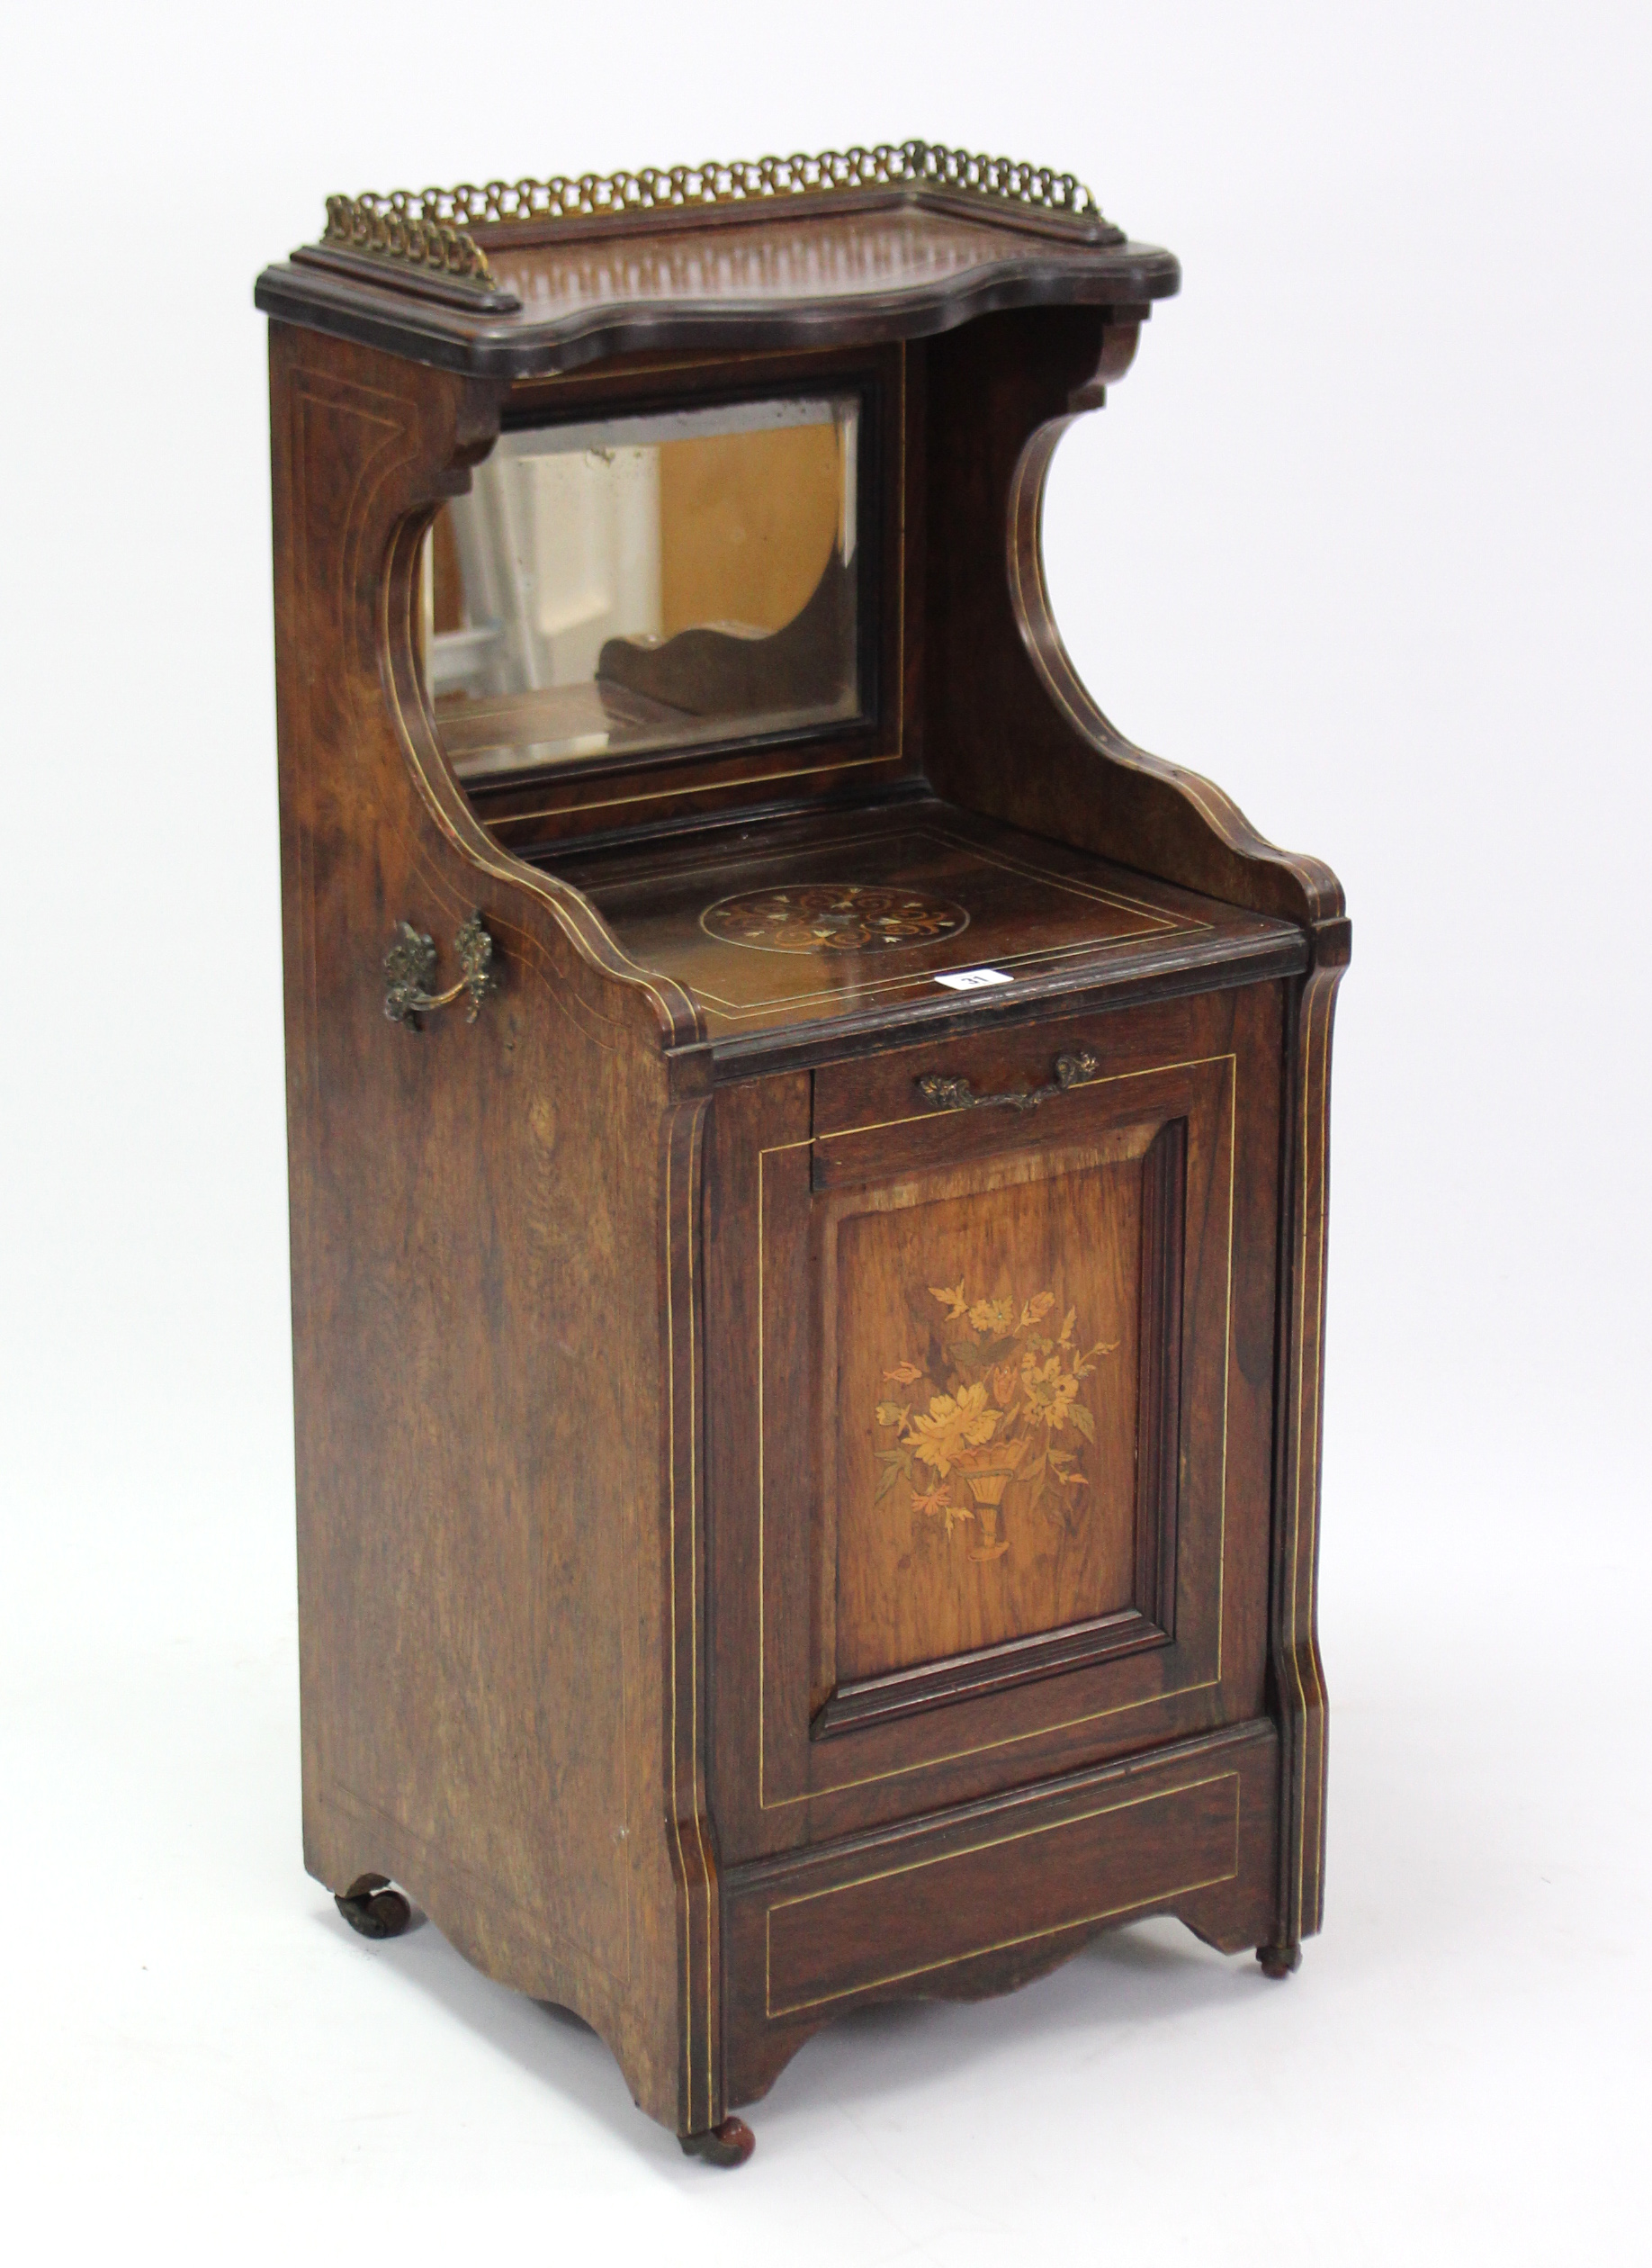 A 19th century inlaid-rosewood purdonium enclosed by fall-front panel door, & on ceramic castors,